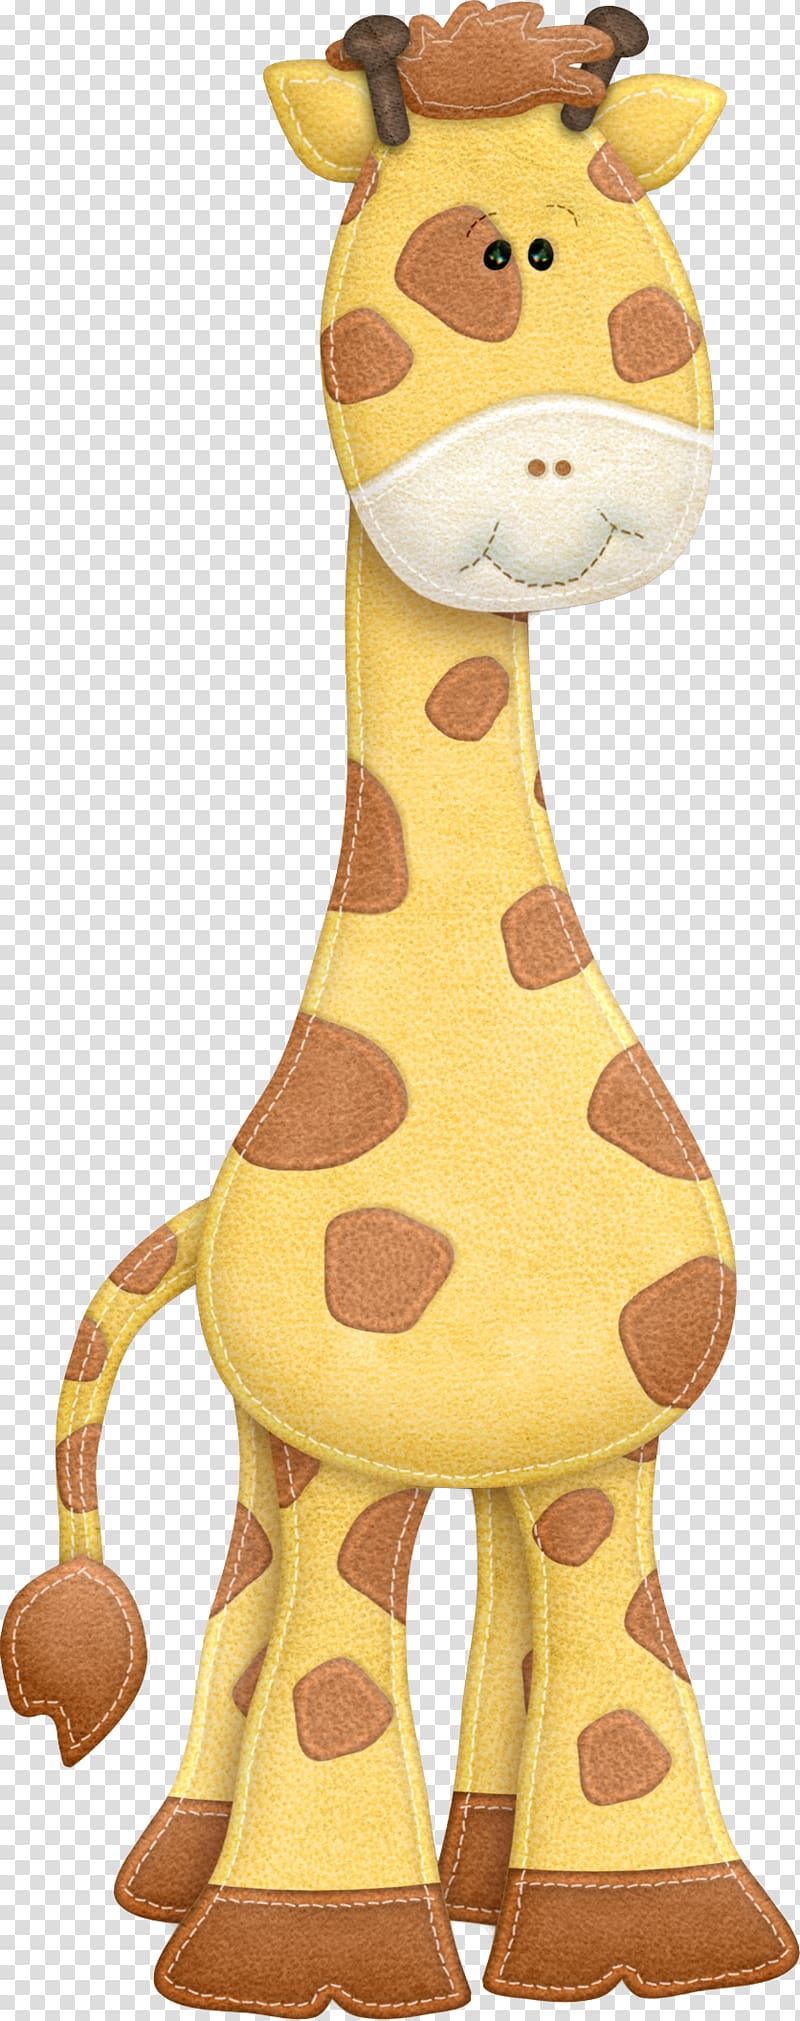 Northern giraffe Digital , others transparent background PNG clipart